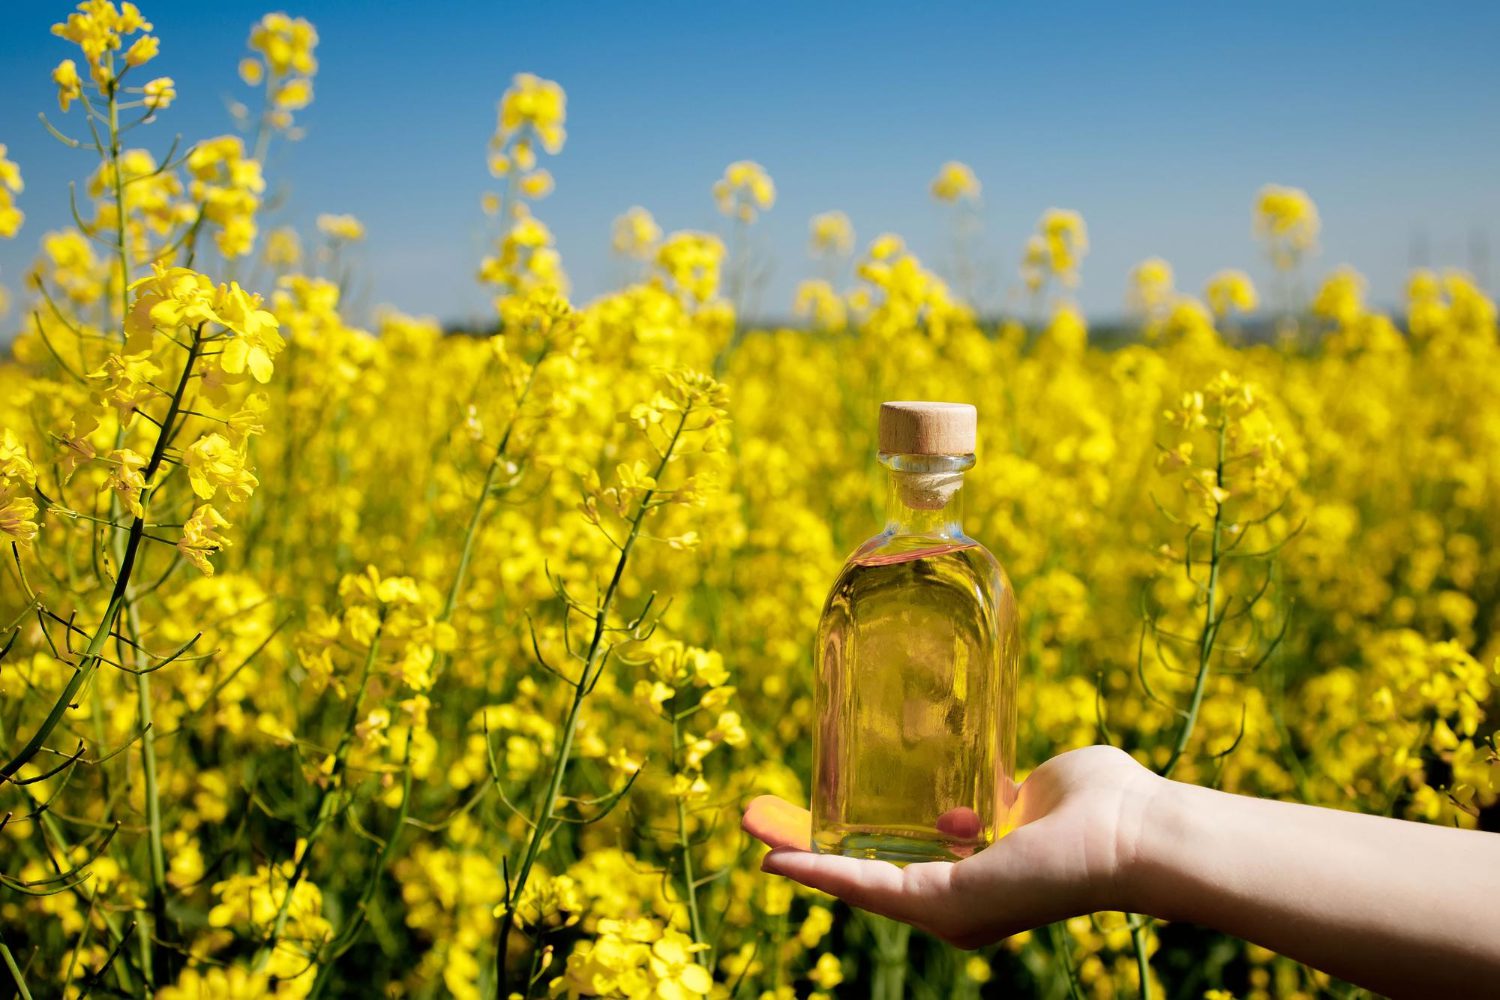 Hand holding a clear bottle of CanolaMAX in a blooming canola field under a blue sky.